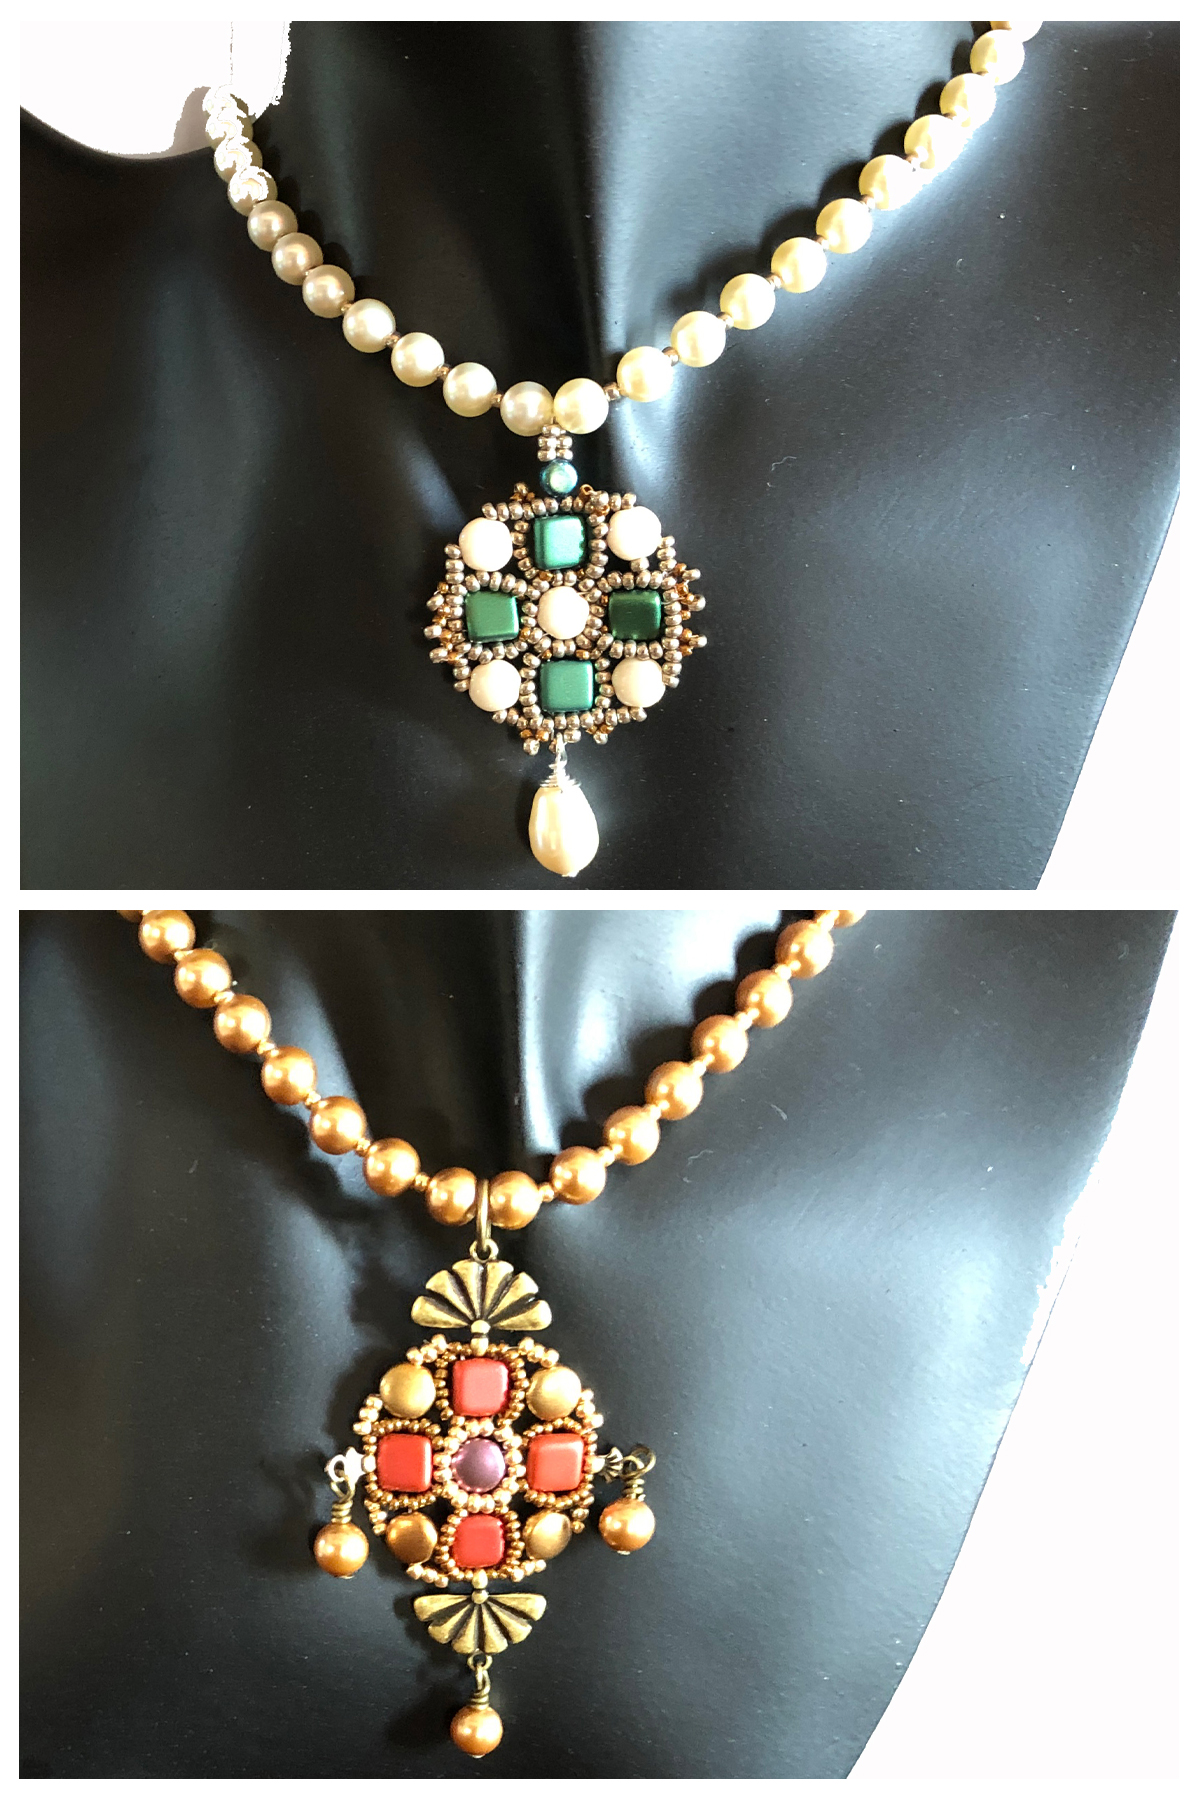 Victorian-Inspired Necklaces